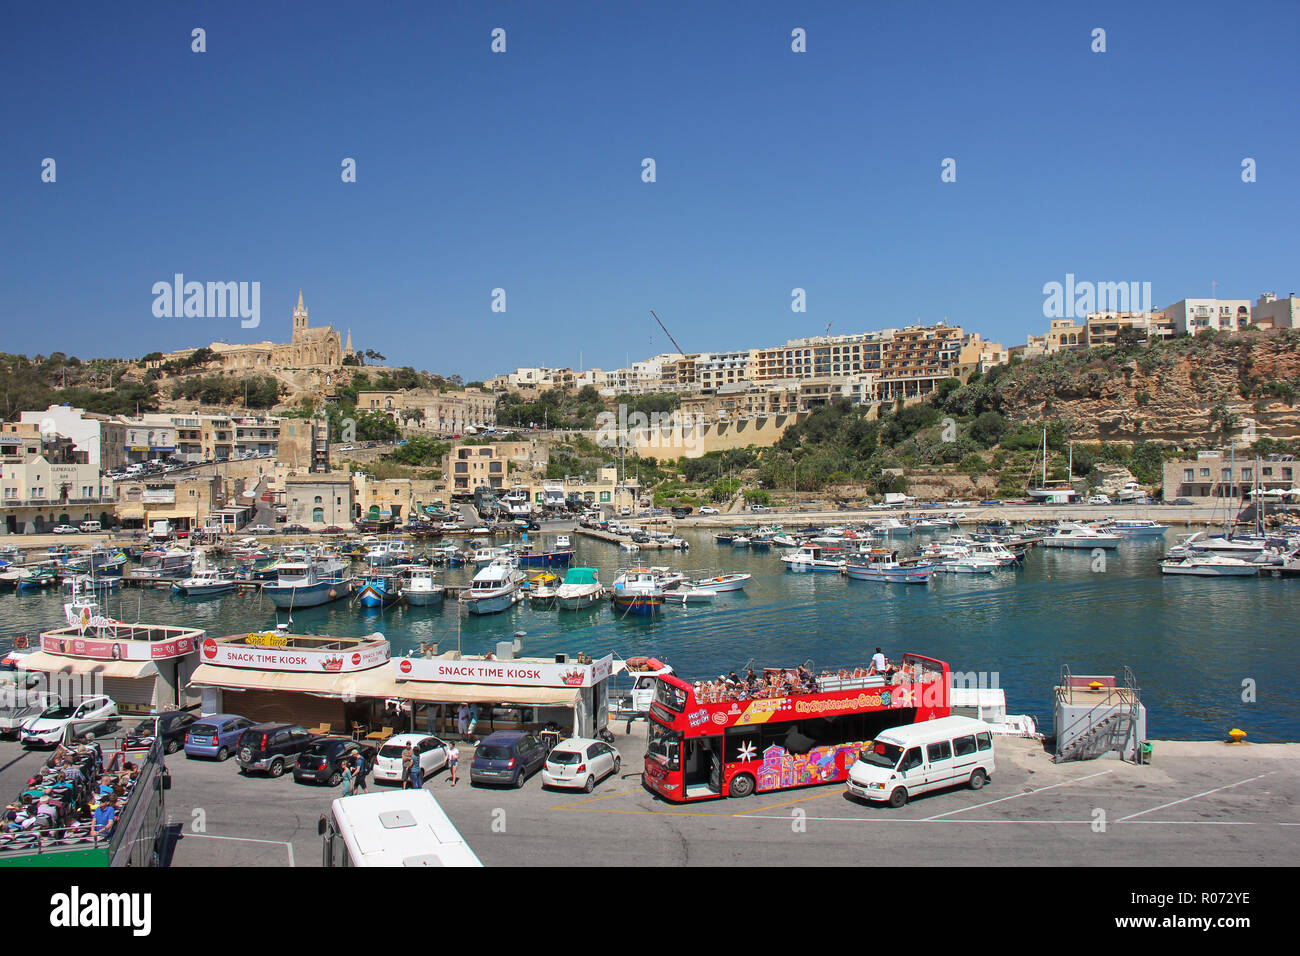 Mgarr, Malta - May 2018: Gozo Ferry Terminal bay view of port with touristic bus, cars, snack bars, yachts and church on background Stock Photo